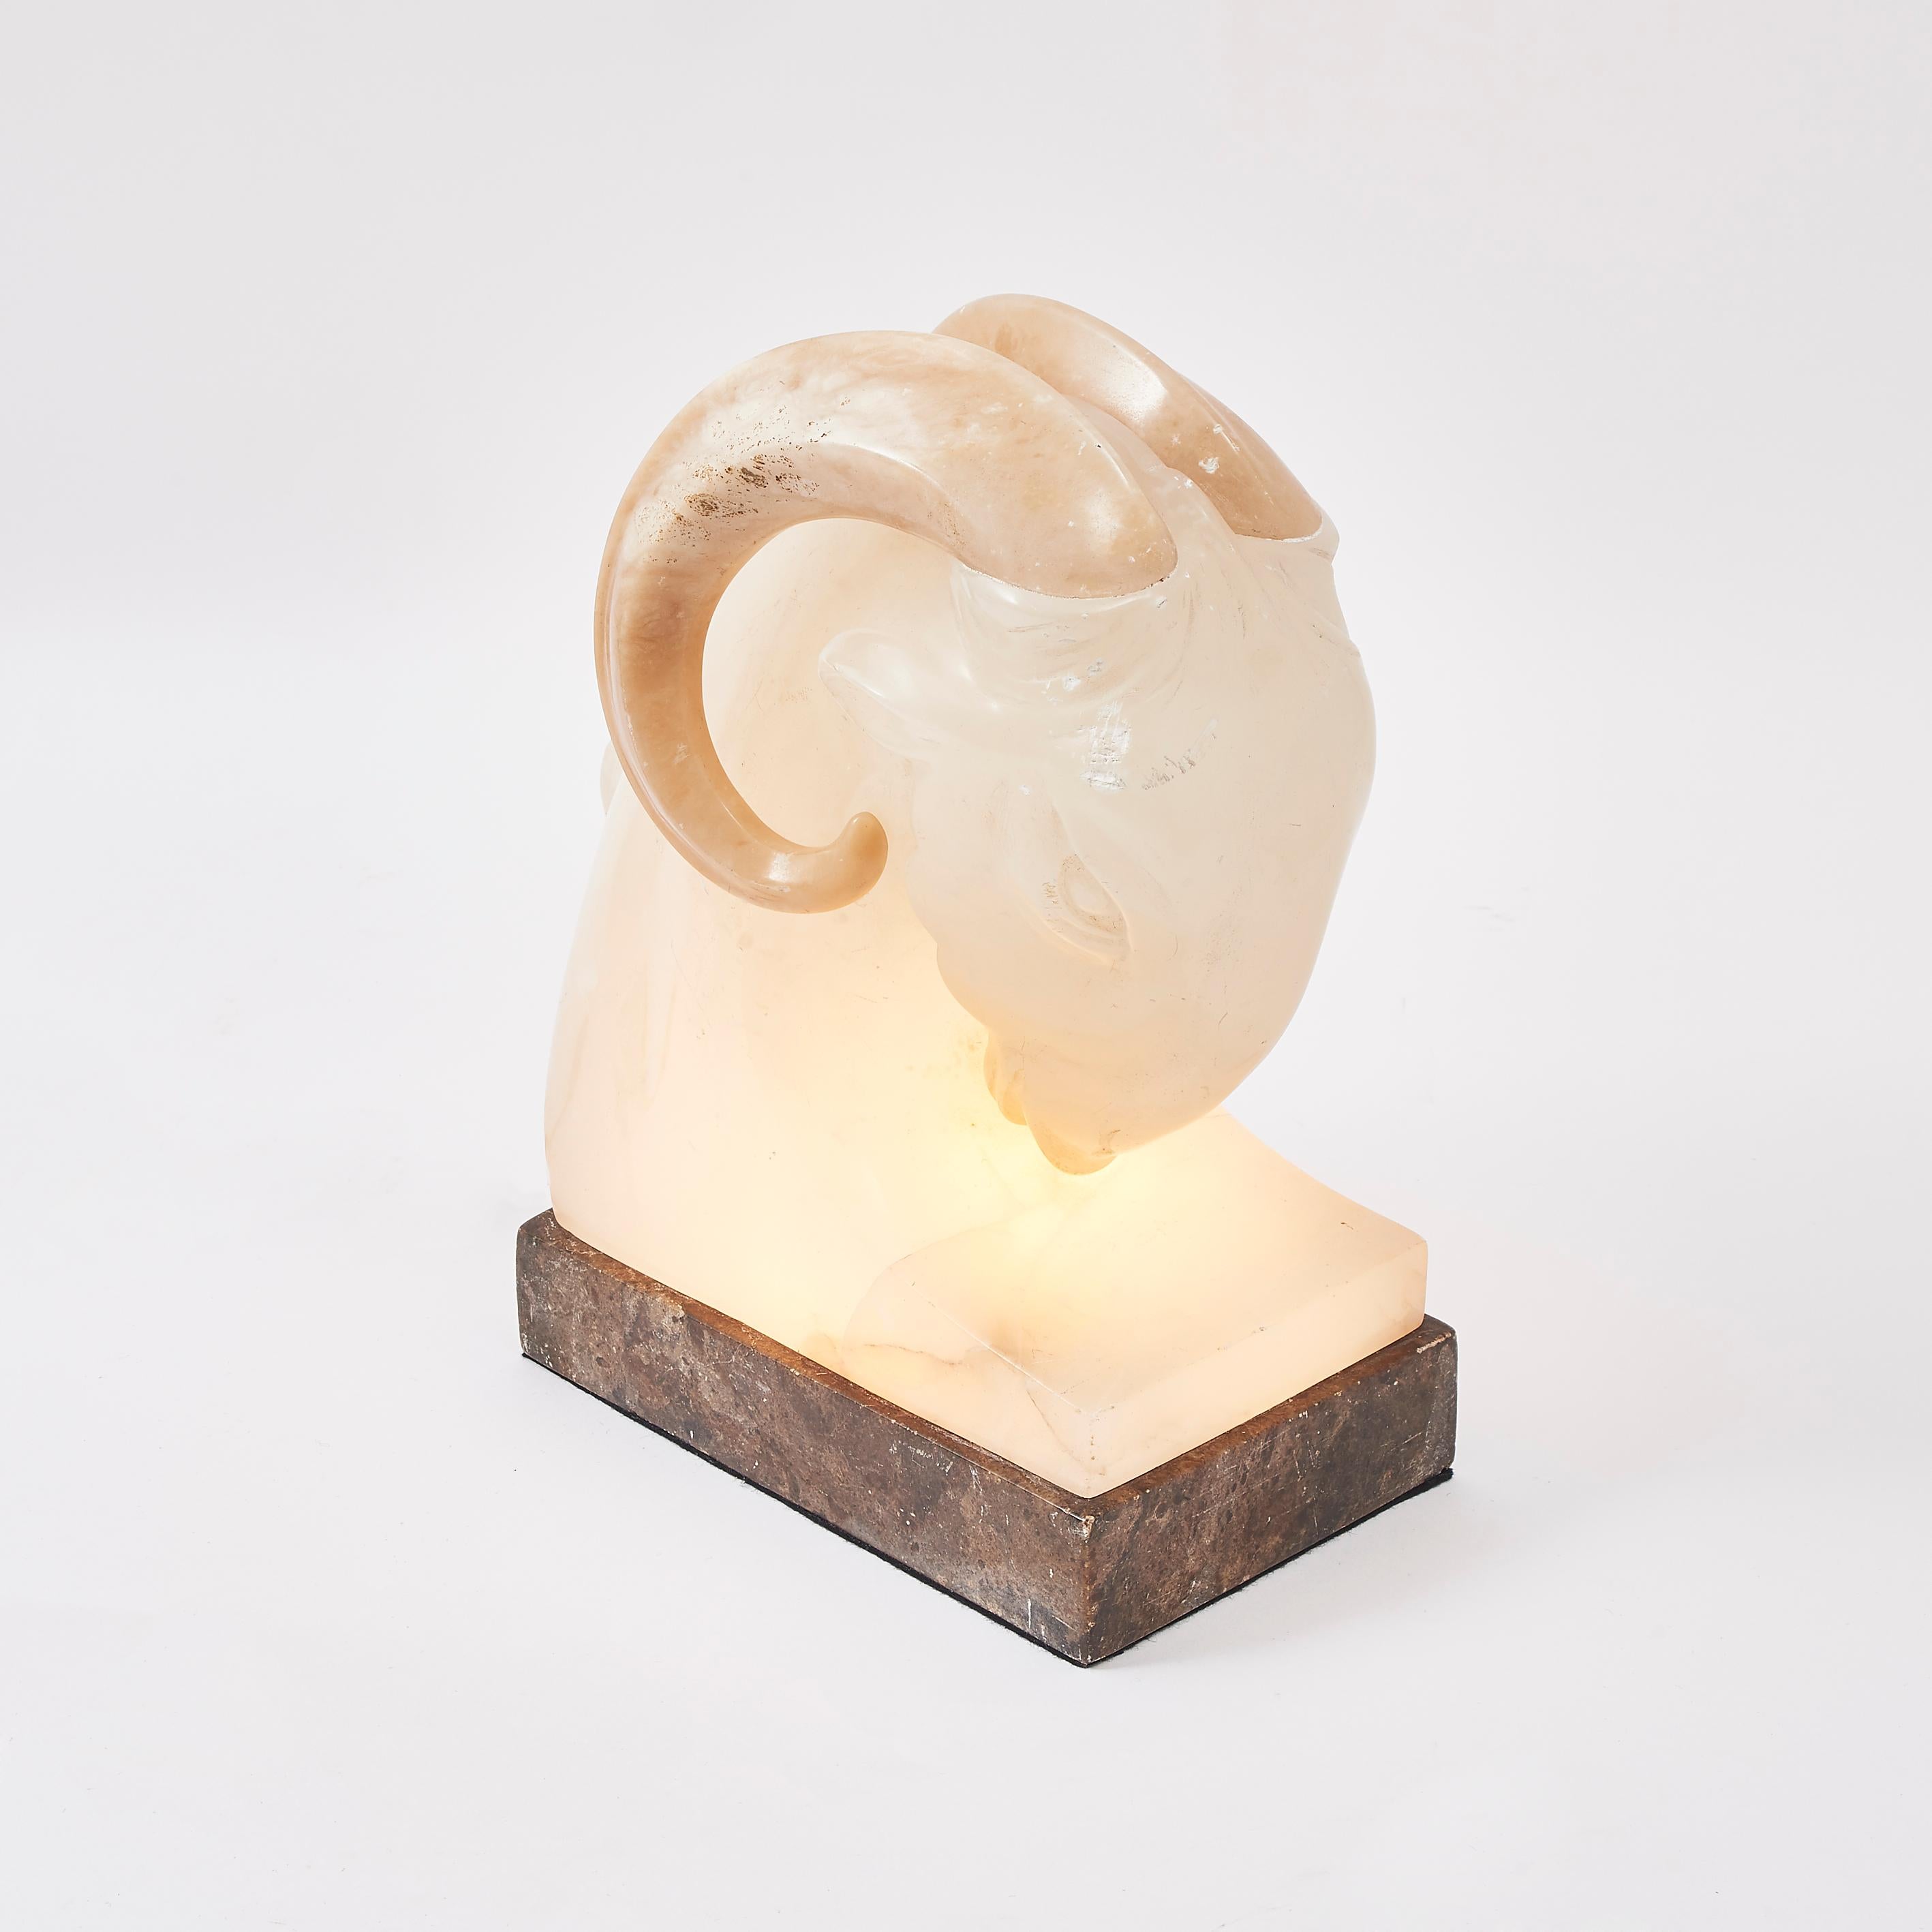 An Art Deco alabaster ram's head, wired as a light, France, circa 1930. An etherial lighting piece, or indeed a sculpture. The downward facing head is formed of a light alabaster with the rams features softly carved into place, the horns in a